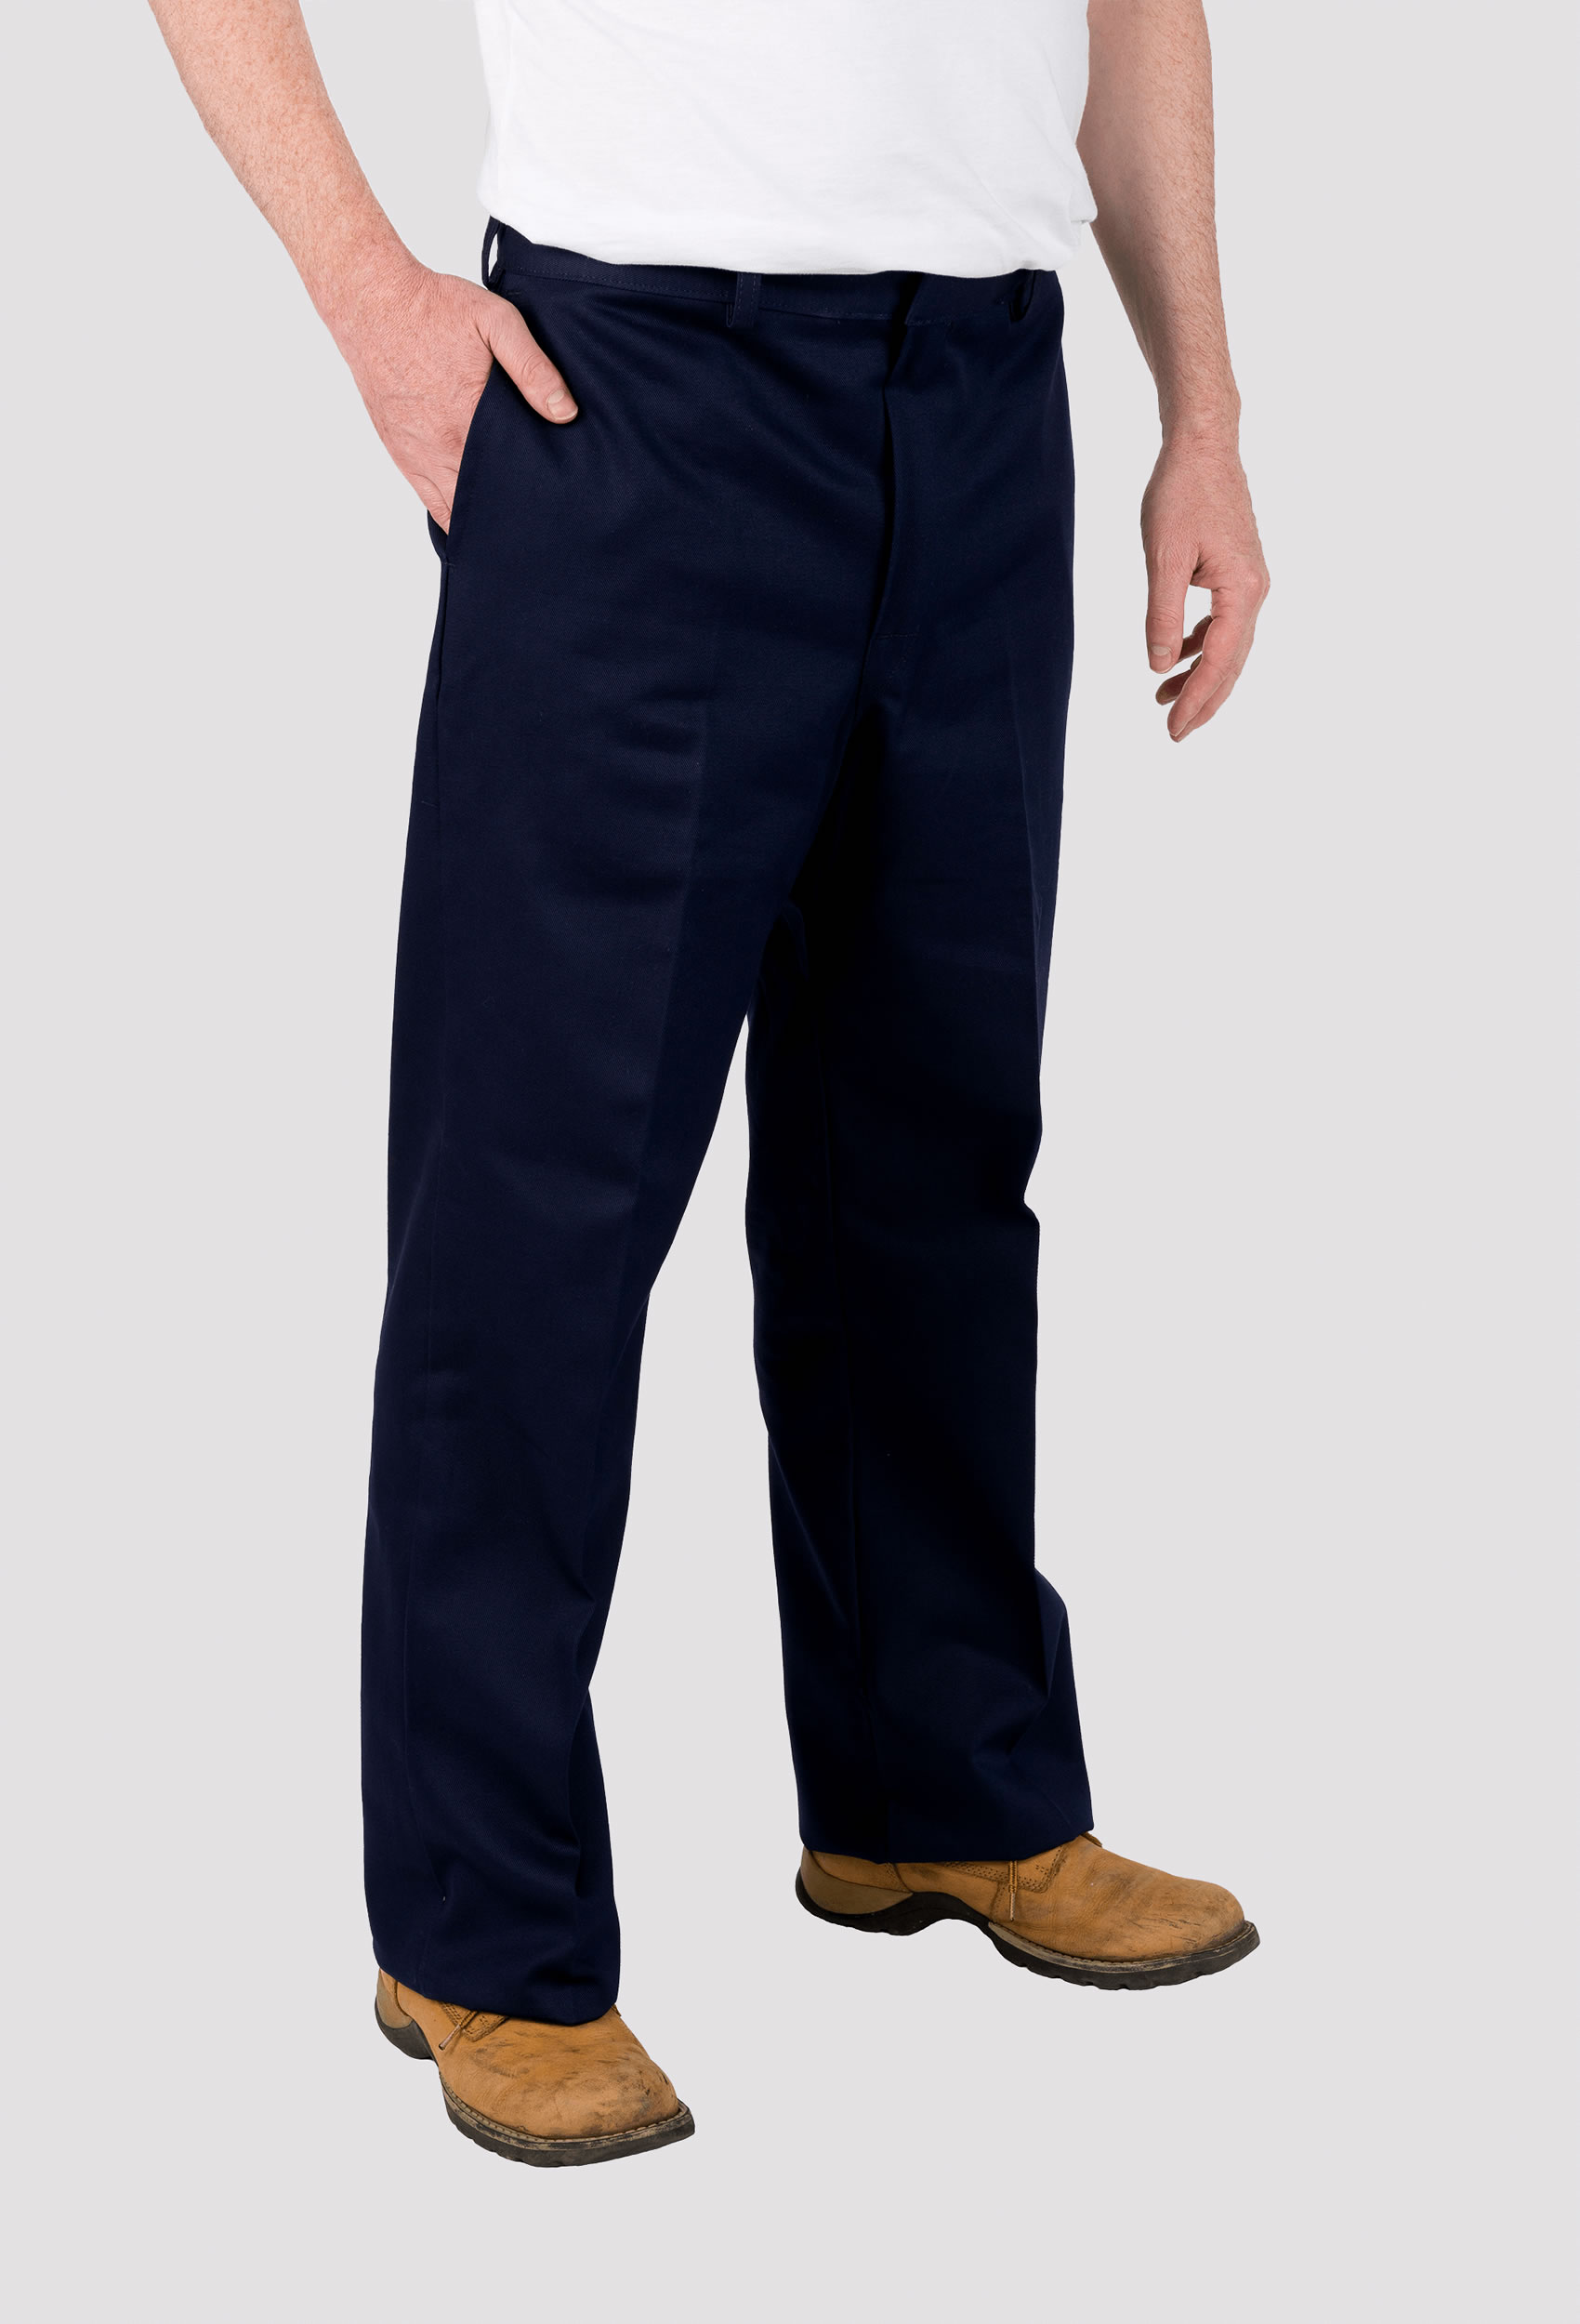 Cotton Drill Engineers Trousers | Workwear Trousers Rental | CLEAN